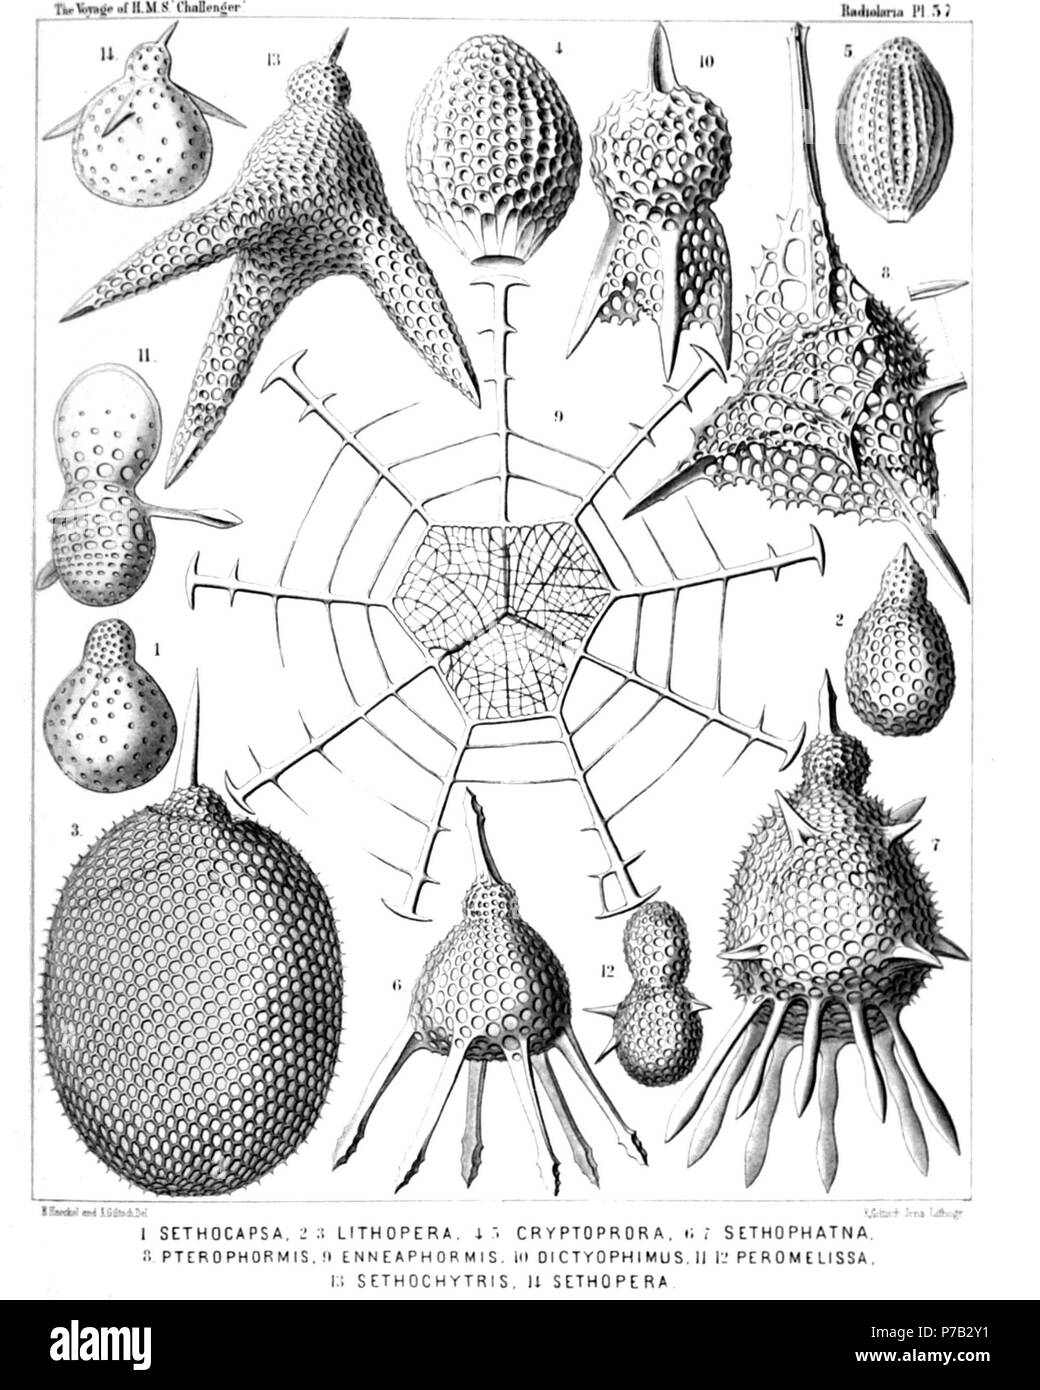 English: Illustration from Report on the Radiolaria collected by H.M.S. Challenger during the years 1873-1876. Part III. Original description follows:  Plate 57. TRIPOCYRTIDA, ANTHOCYRTIDA et SETHOCYRTIDA.  Diam.  Fig. 1. Dicolocapsa microcephala, n. sp., × 400  Fig. 2. Sethocapsa pyriformis, n. sp., × 300  Fig. 3. Lithopera ananassa, n. sp., × 500  Fig. 4. Sethamphora favosa, n. sp. (vel Cryptoprora favosa), × 400  Fig. 5. Sethamphora microstoma, n. sp. (vel Cryptoprora microstoma), × 300  Fig. 6. Clistophæna hexolena, n. sp., × 300  Fig. 7. Clistophæna armata, n. sp., × 300  Fig. 8. Clathrom Stock Photo